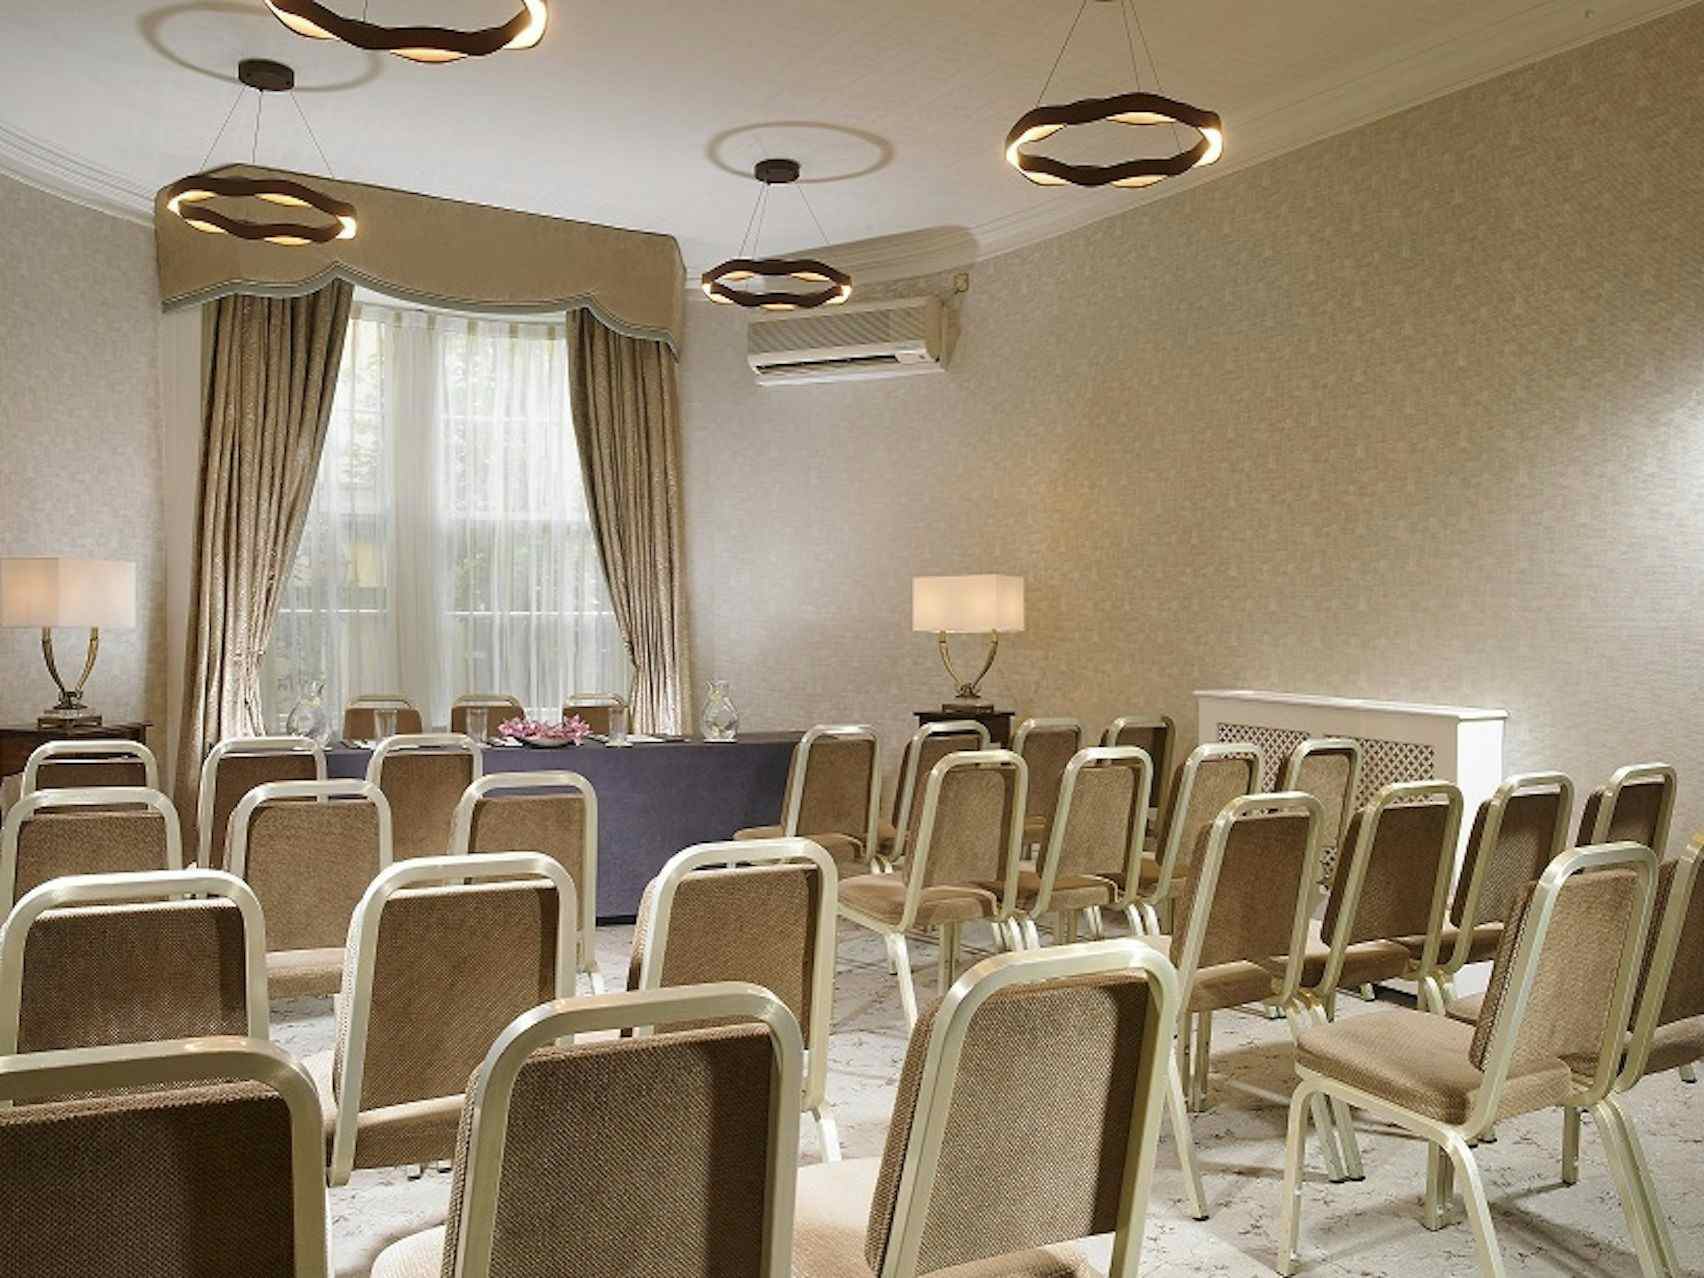 Board Room At Buswells Hotel A Dublin Meeting Room For Hire